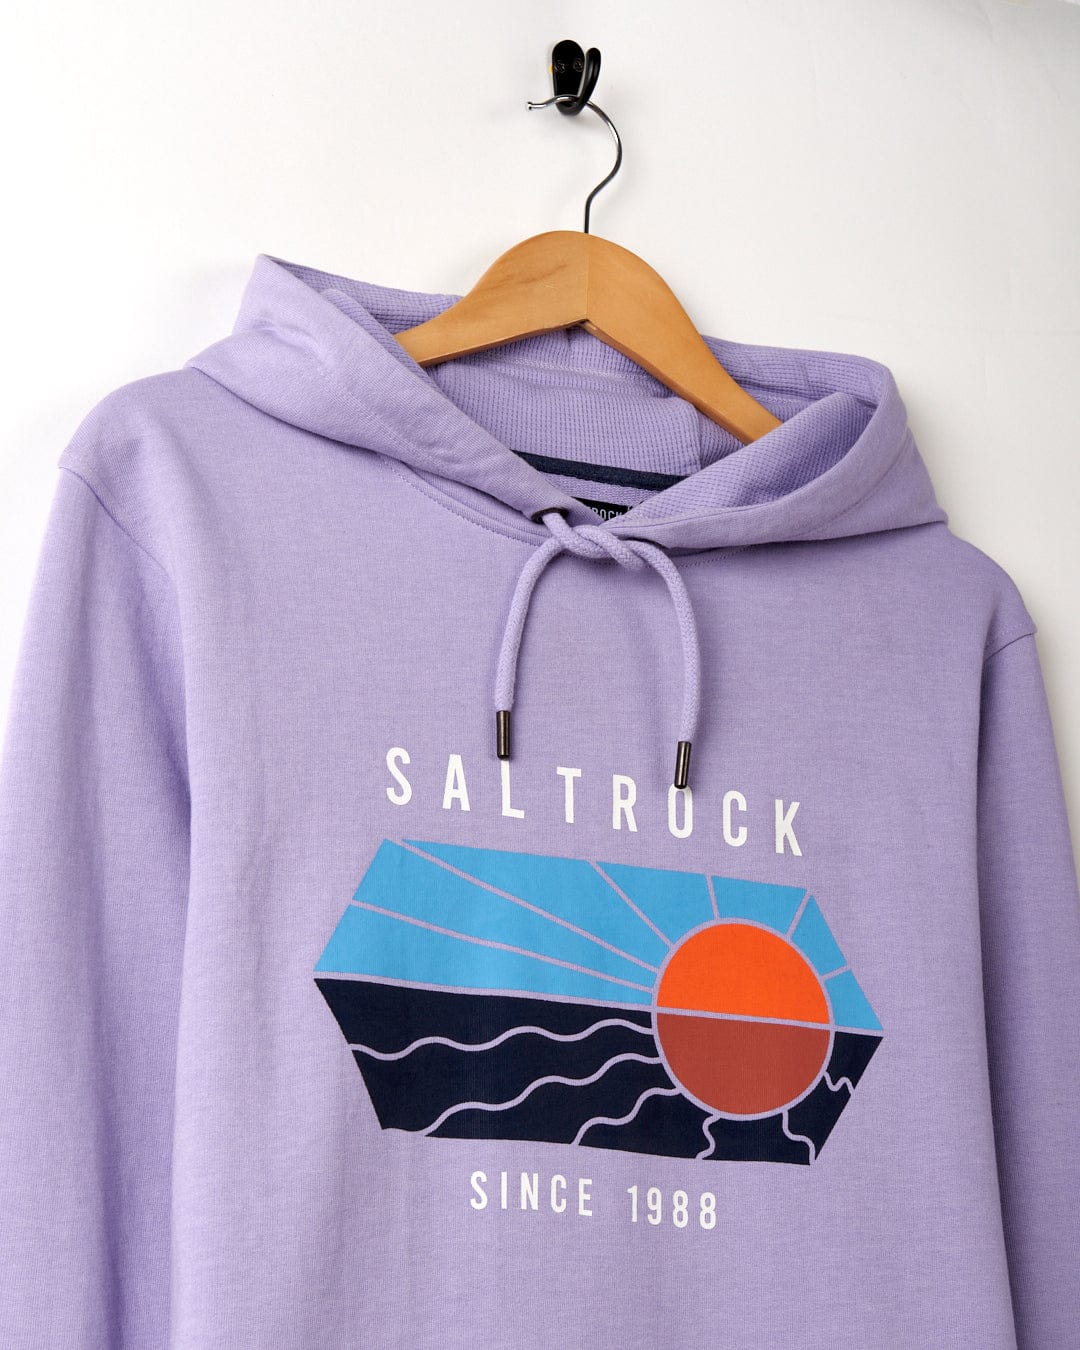 A Vantage Colour - Pop Hoodie in purple with Saltrock branding and a drawcord hood. Made of a Cotton/Polyester blend.